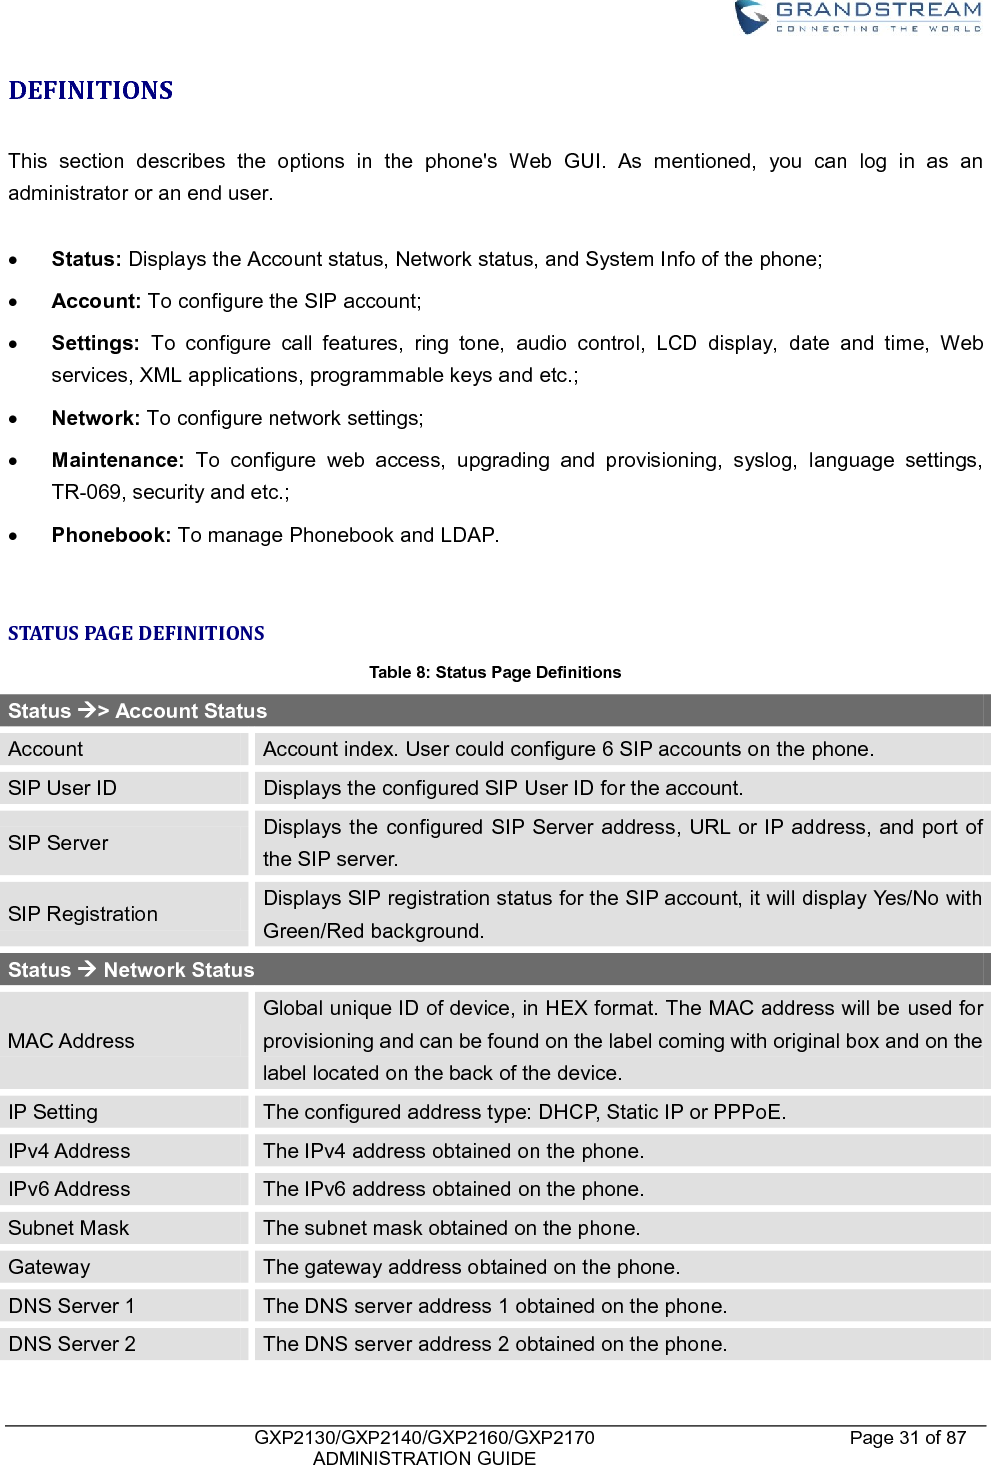    GXP2130/GXP2140/GXP2160/GXP2170   ADMINISTRATION GUIDE Page 31 of 87     DEFINITIONS  This  section  describes  the  options  in  the  phone&apos;s  Web  GUI.  As  mentioned,  you  can  log  in  as  an administrator or an end user.   Status: Displays the Account status, Network status, and System Info of the phone;  Account: To configure the SIP account;  Settings:  To  configure  call  features,  ring  tone,  audio  control,  LCD  display,  date  and  time,  Web services, XML applications, programmable keys and etc.;  Network: To configure network settings;  Maintenance:  To  configure  web  access,  upgrading  and  provisioning,  syslog,  language  settings, TR-069, security and etc.;  Phonebook: To manage Phonebook and LDAP.  STATUS PAGE DEFINITIONS Table 8: Status Page Definitions Status &gt; Account Status Account Account index. User could configure 6 SIP accounts on the phone. SIP User ID Displays the configured SIP User ID for the account. SIP Server Displays the configured  SIP Server address, URL or IP address, and port of the SIP server. SIP Registration Displays SIP registration status for the SIP account, it will display Yes/No with Green/Red background. Status  Network Status MAC Address Global unique ID of device, in HEX format. The MAC address will be used for provisioning and can be found on the label coming with original box and on the label located on the back of the device. IP Setting The configured address type: DHCP, Static IP or PPPoE. IPv4 Address The IPv4 address obtained on the phone. IPv6 Address The IPv6 address obtained on the phone. Subnet Mask The subnet mask obtained on the phone. Gateway The gateway address obtained on the phone. DNS Server 1 The DNS server address 1 obtained on the phone. DNS Server 2 The DNS server address 2 obtained on the phone. 